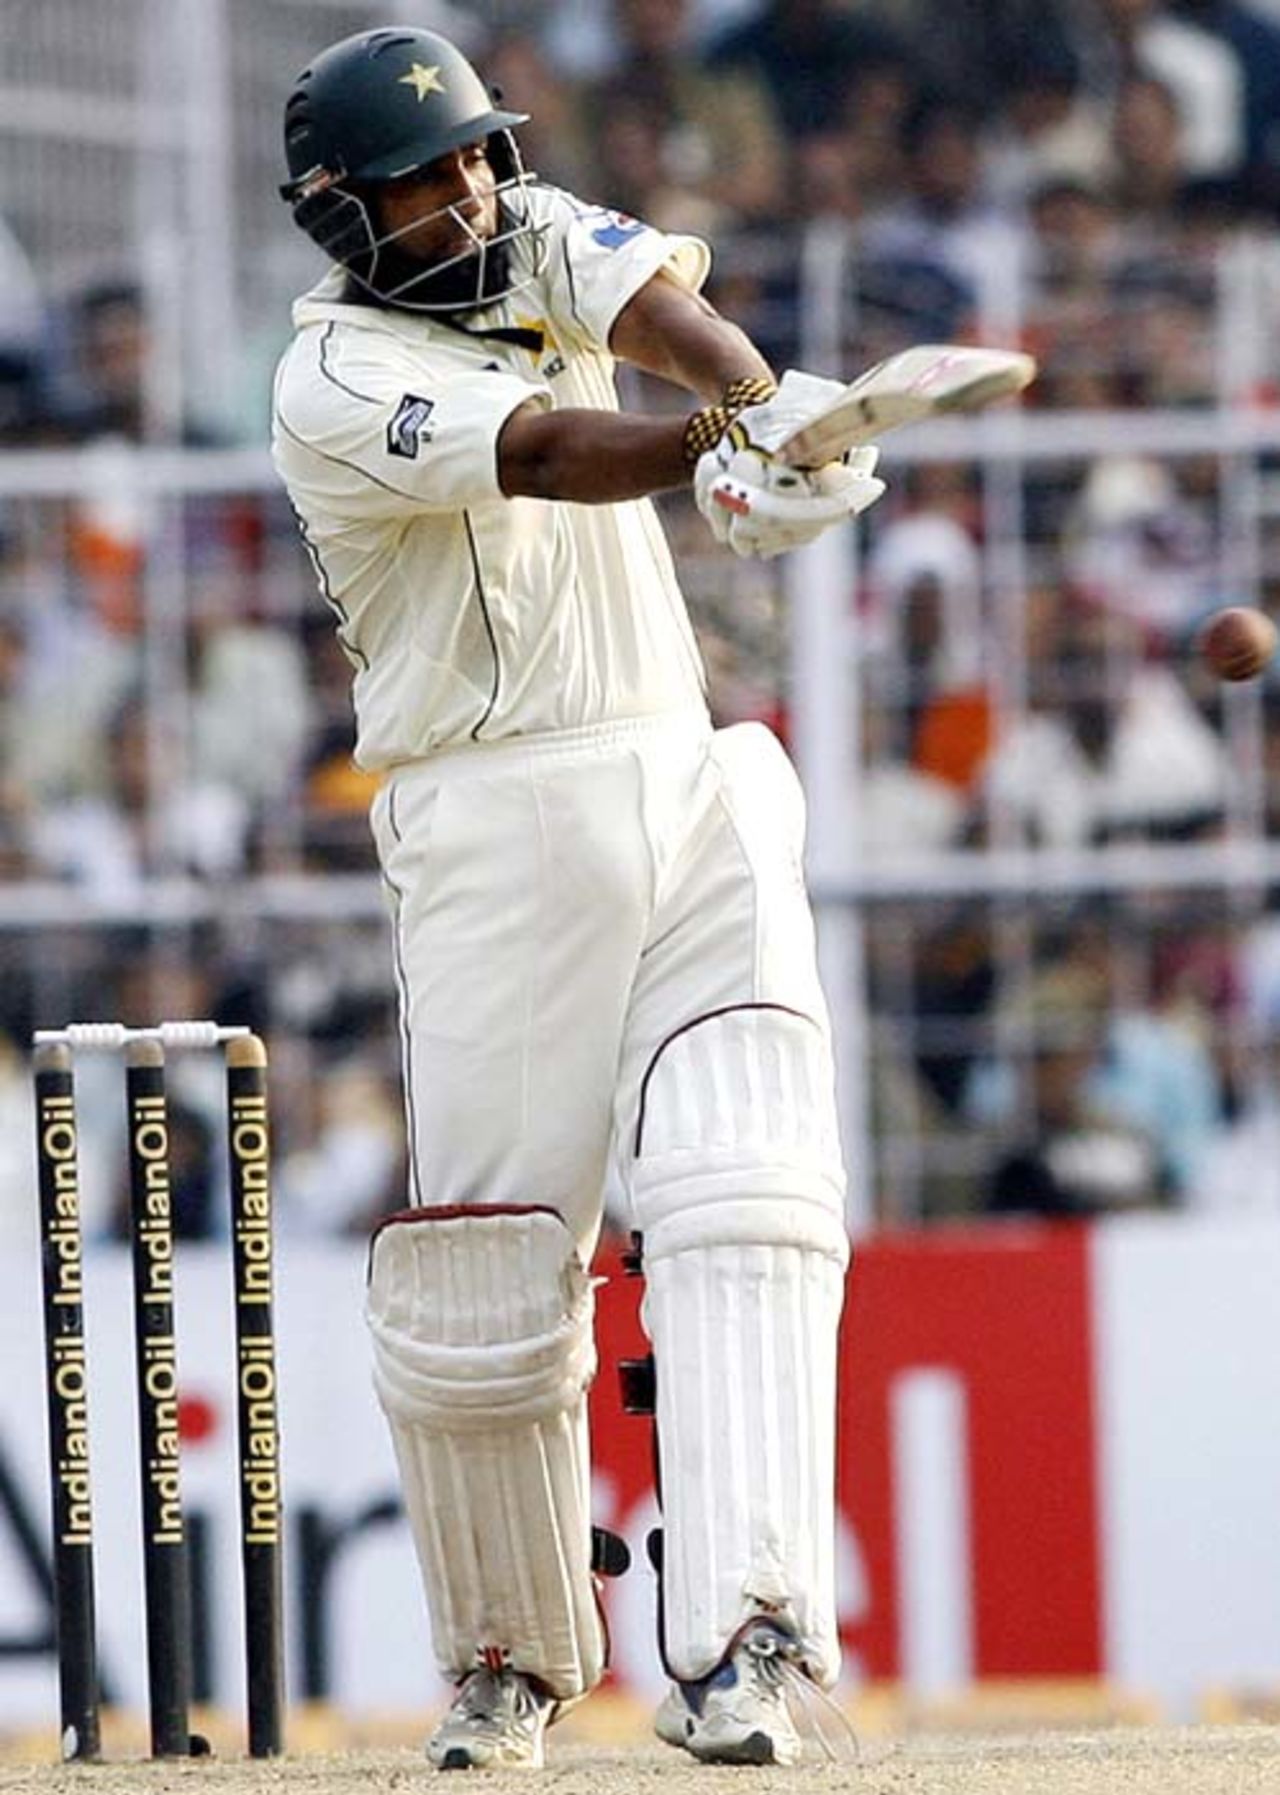 Mohammad Yousuf deals with the short ball, India v Pakistan, 2nd Test, Kolkata, 5th day, December 4, 2007